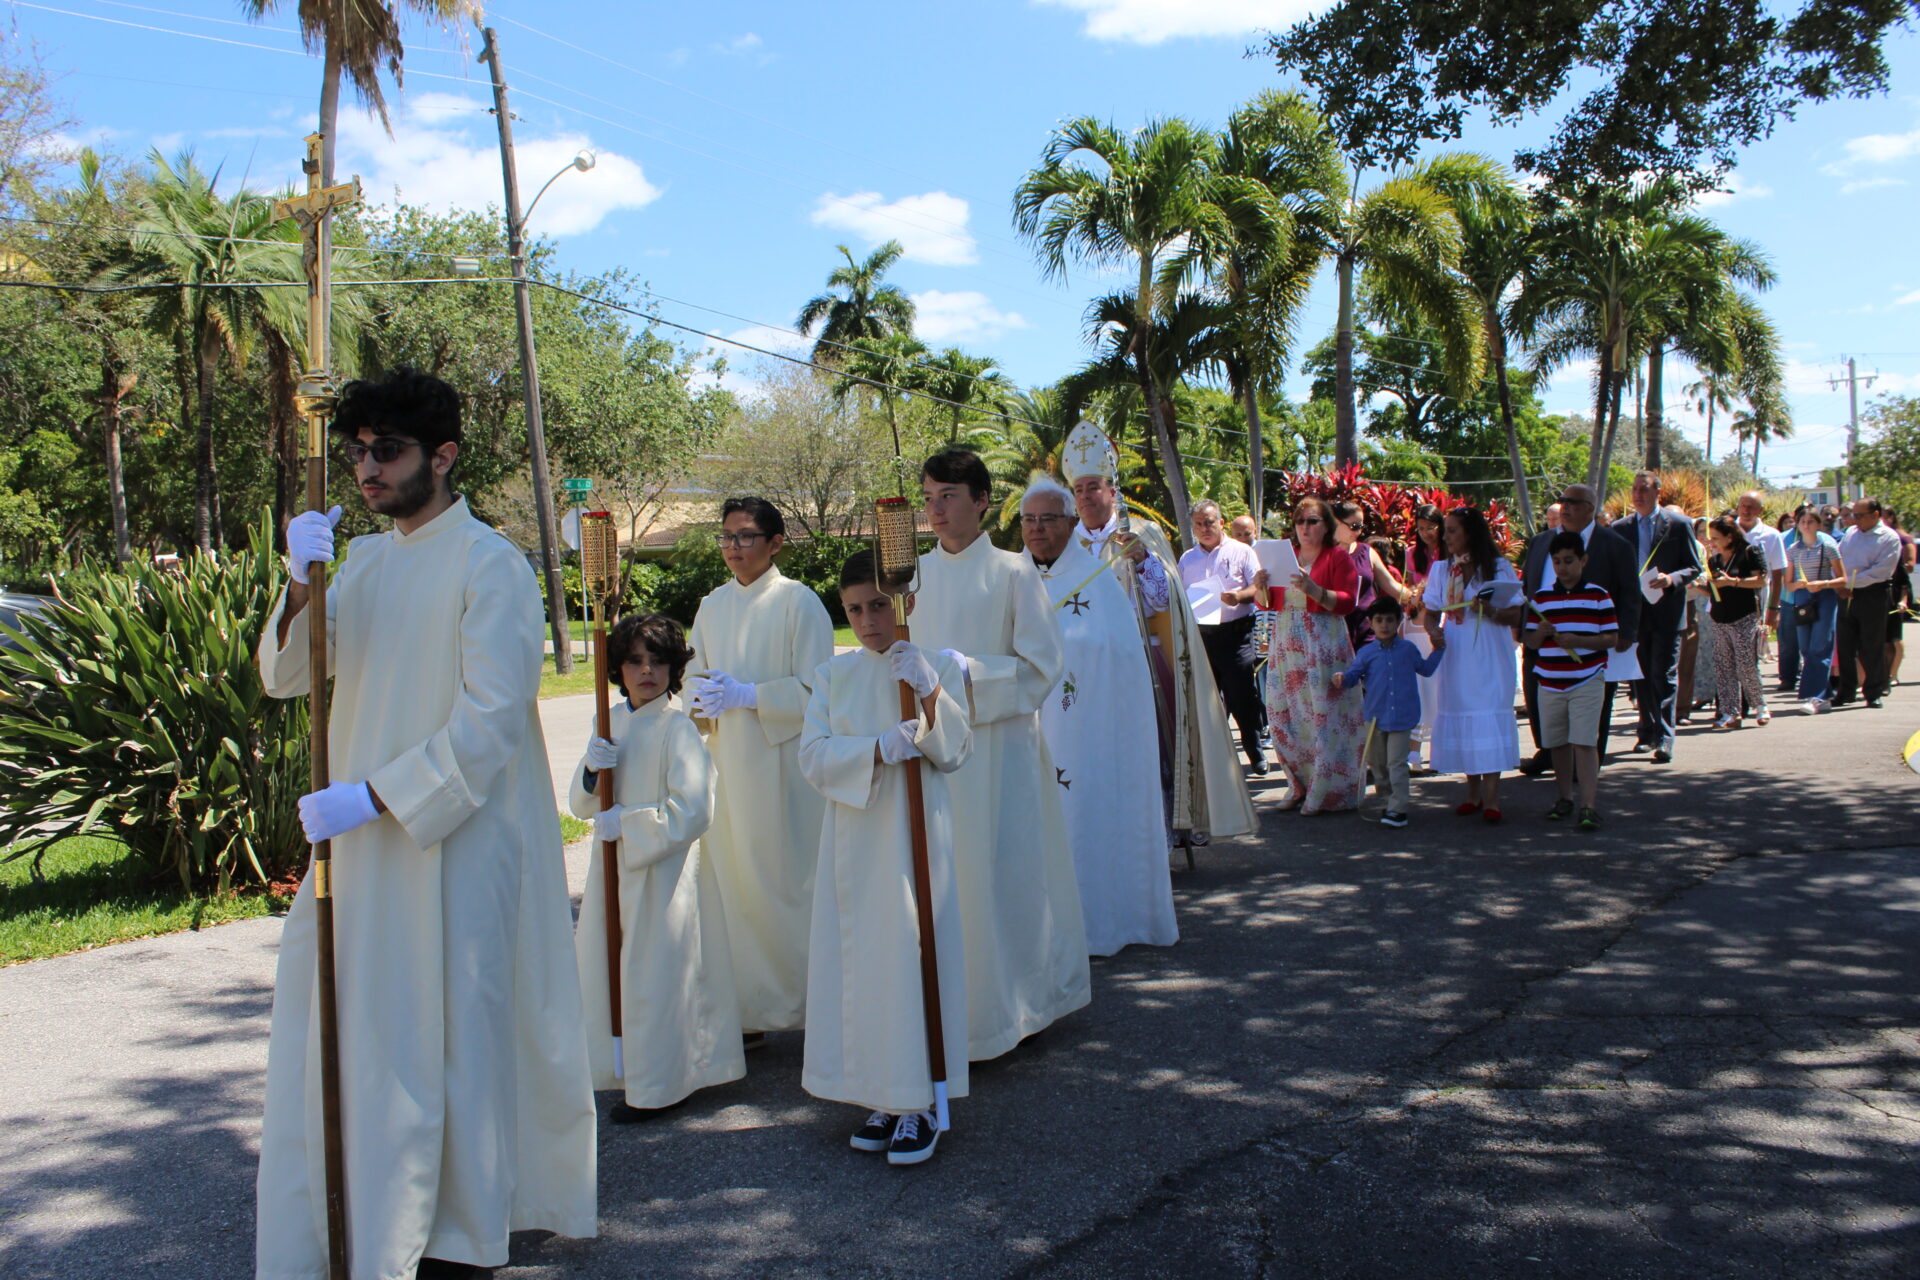 A parade with sacristans, priests, and a bishop along with the people